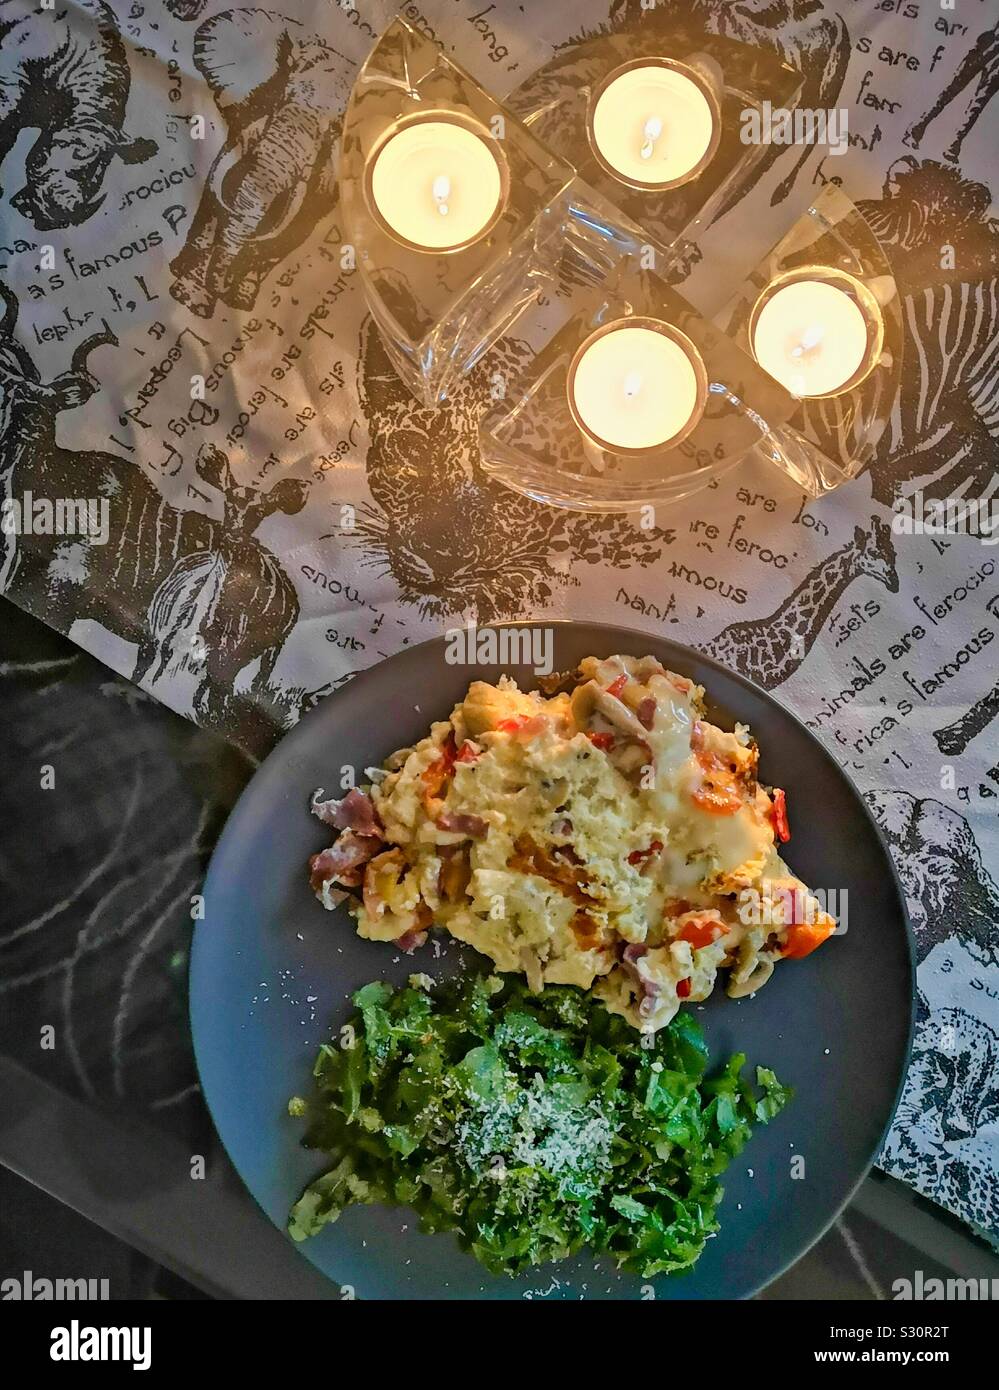 Elevated view of Spanish omelette with salad by candlelight Stock Photo